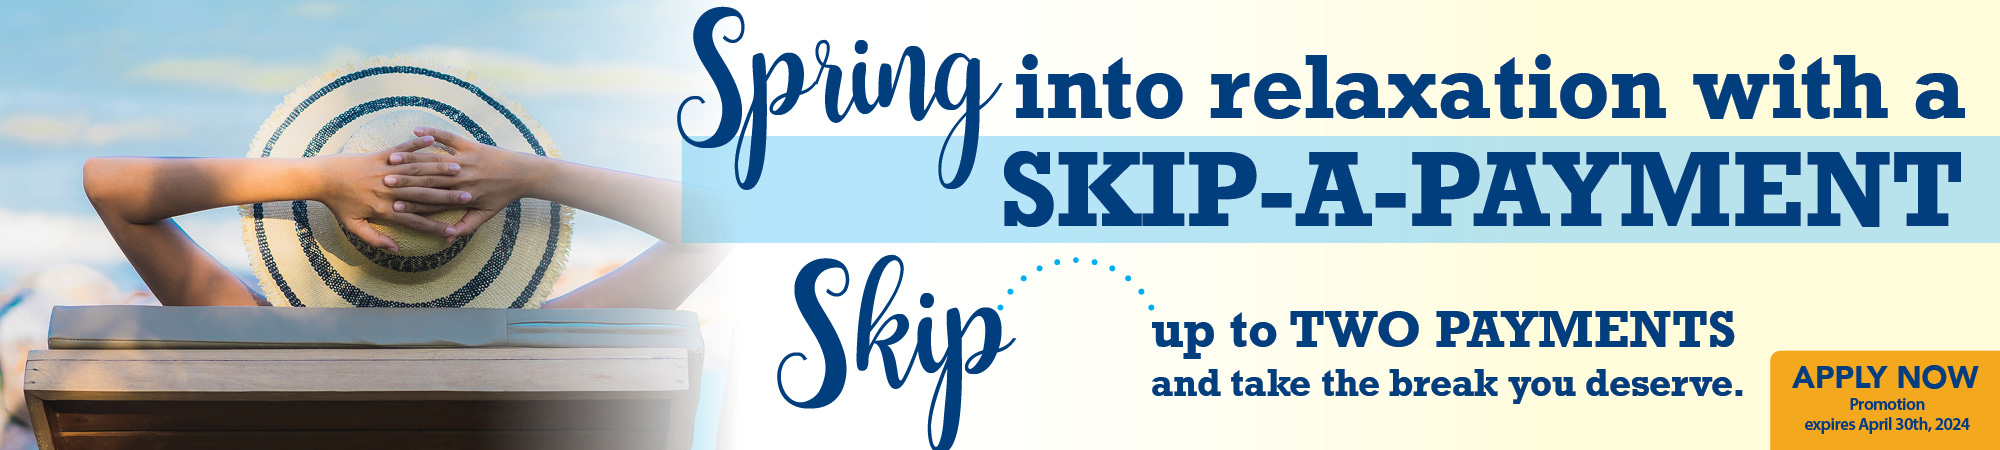 Spring into relaxation with a skip-a-pay